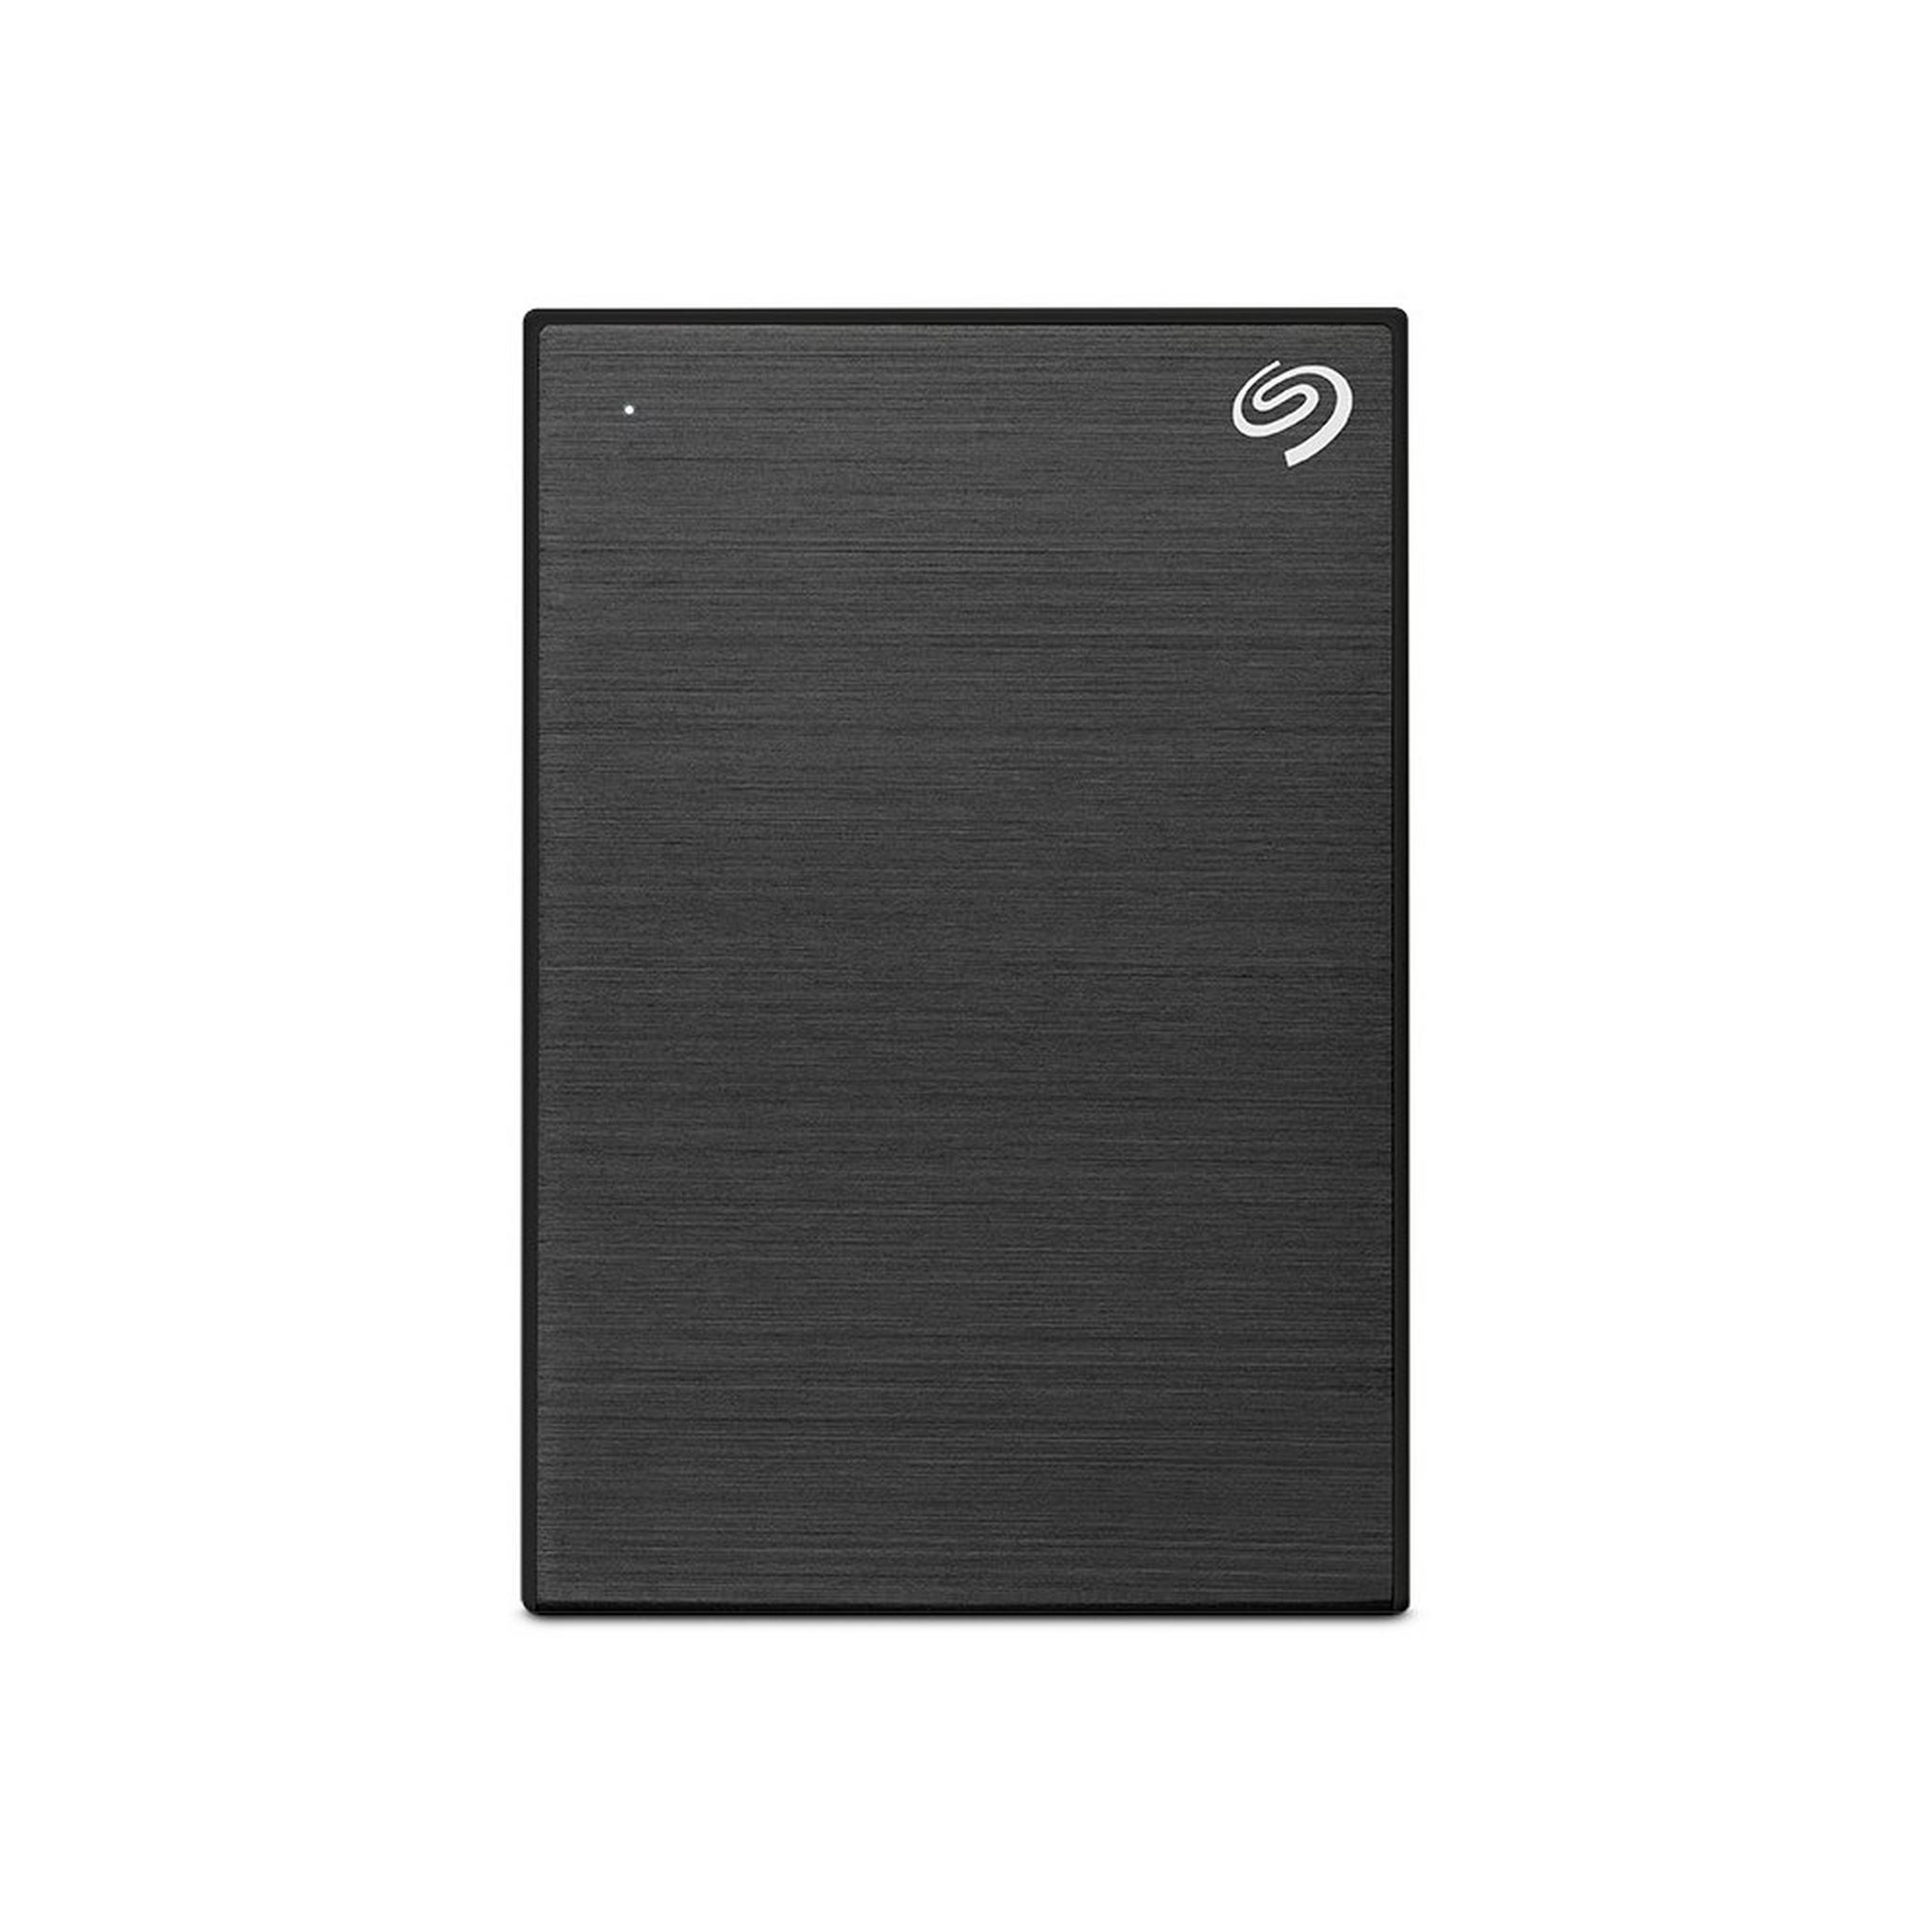 SEAGATE One Touch Portable Hard drive, 5TB HDD with Password, STKZ5000400 - Black